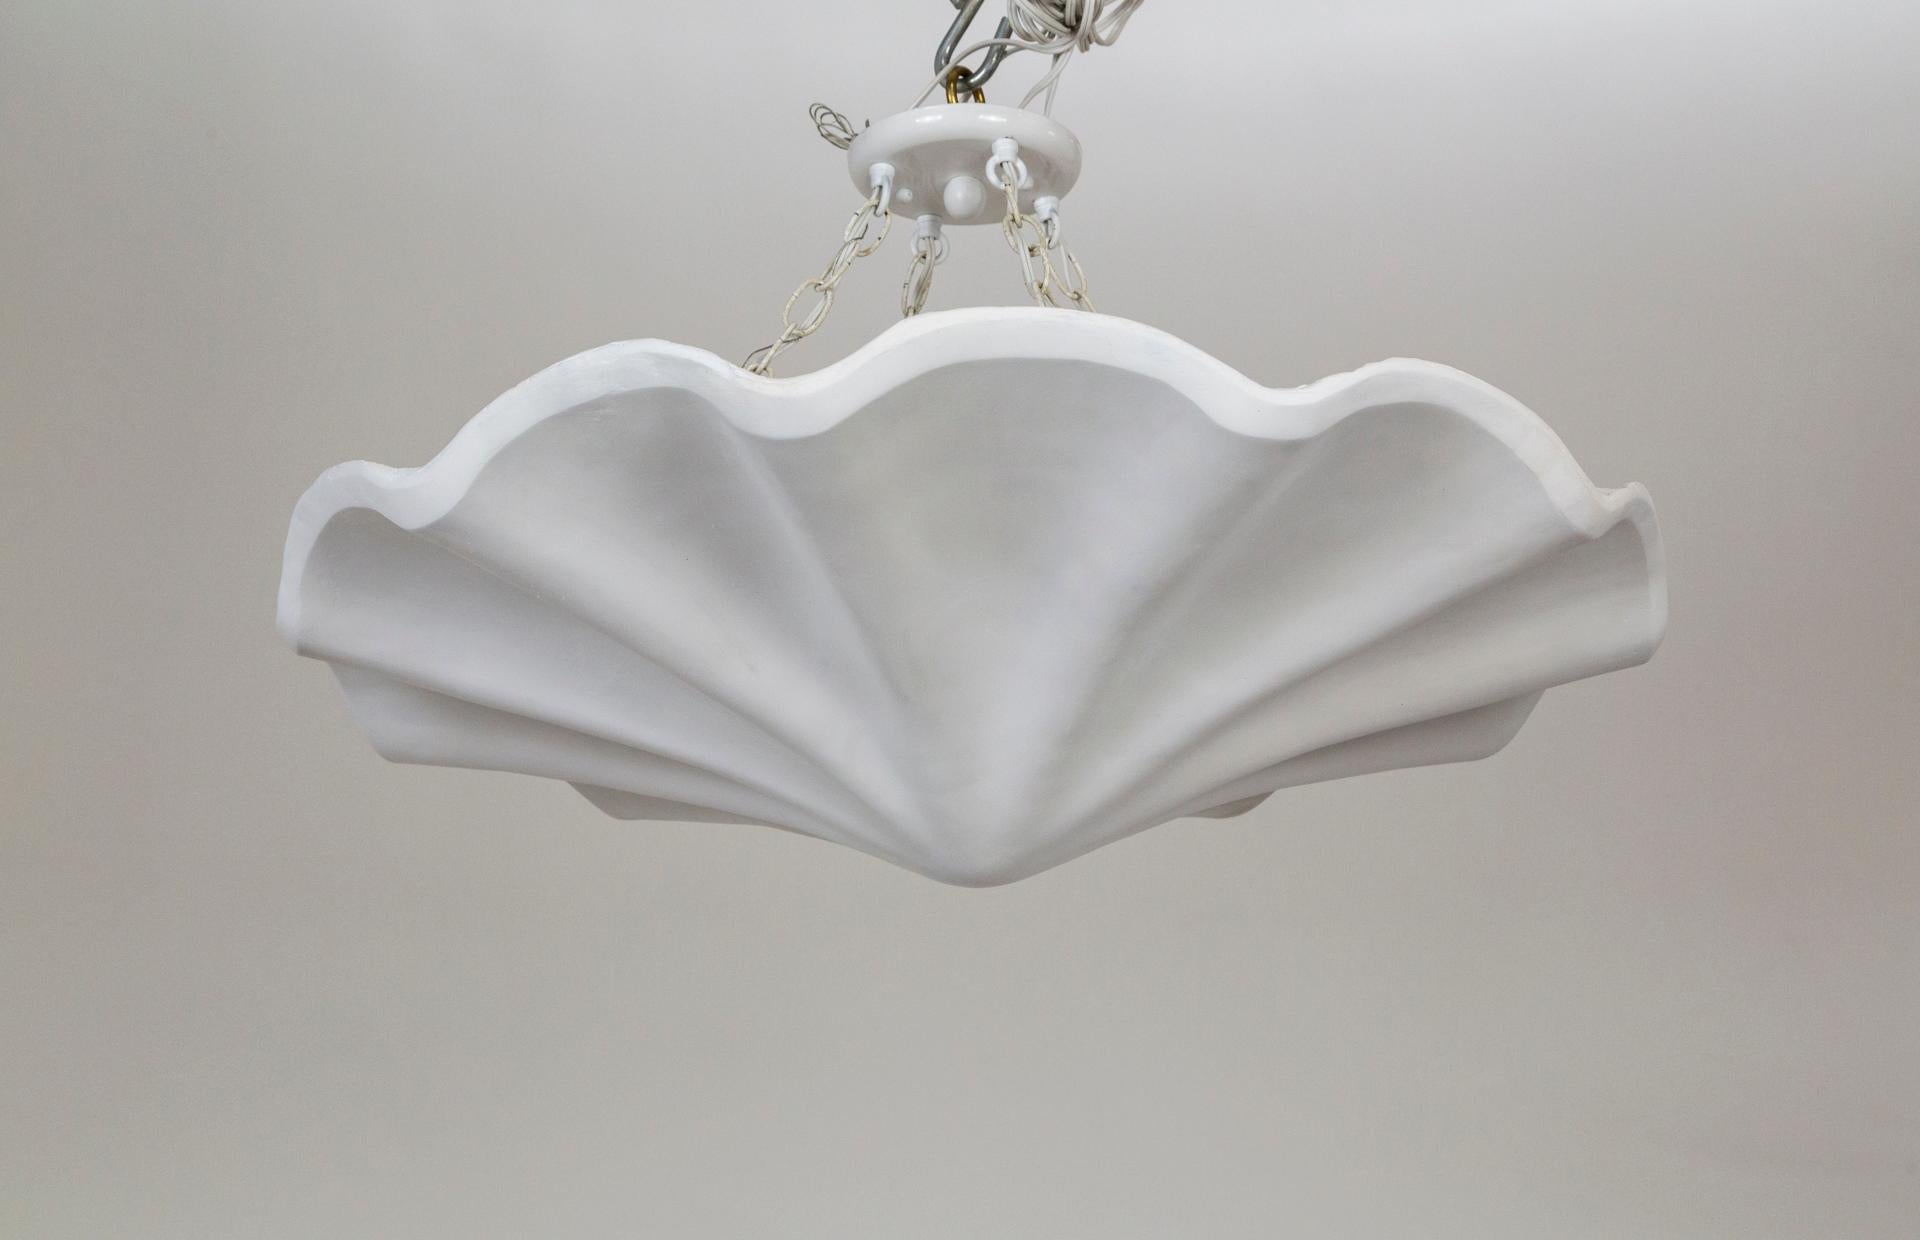 A plaster pendant in a smooth, undulating shell shape, with scalloped edges. A newer take on Francis Elkins's 1940s plaster plafonnier. Hanging by four white chains; with 4 medium base ceramic sockets. Contemporary; made from an original mold. We